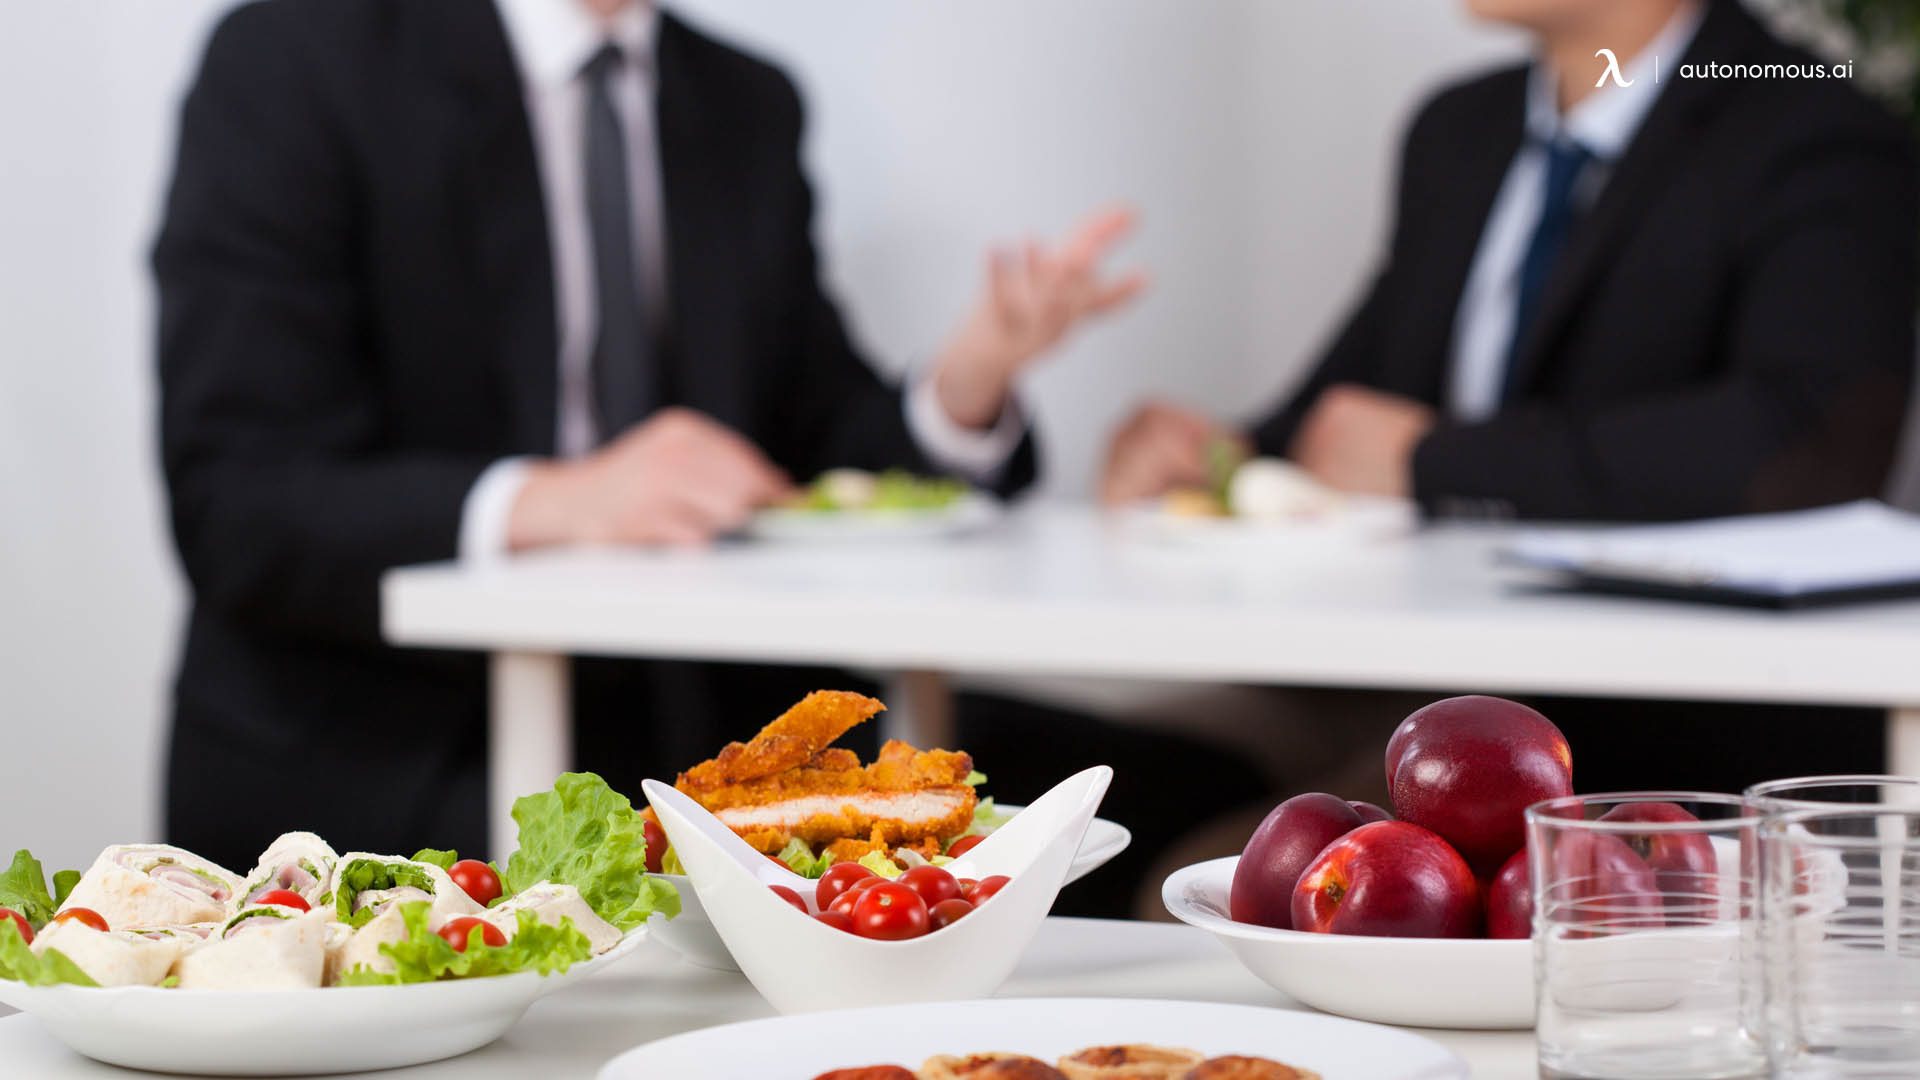 8 Things You Should Know to Optimize Lunch Time Break